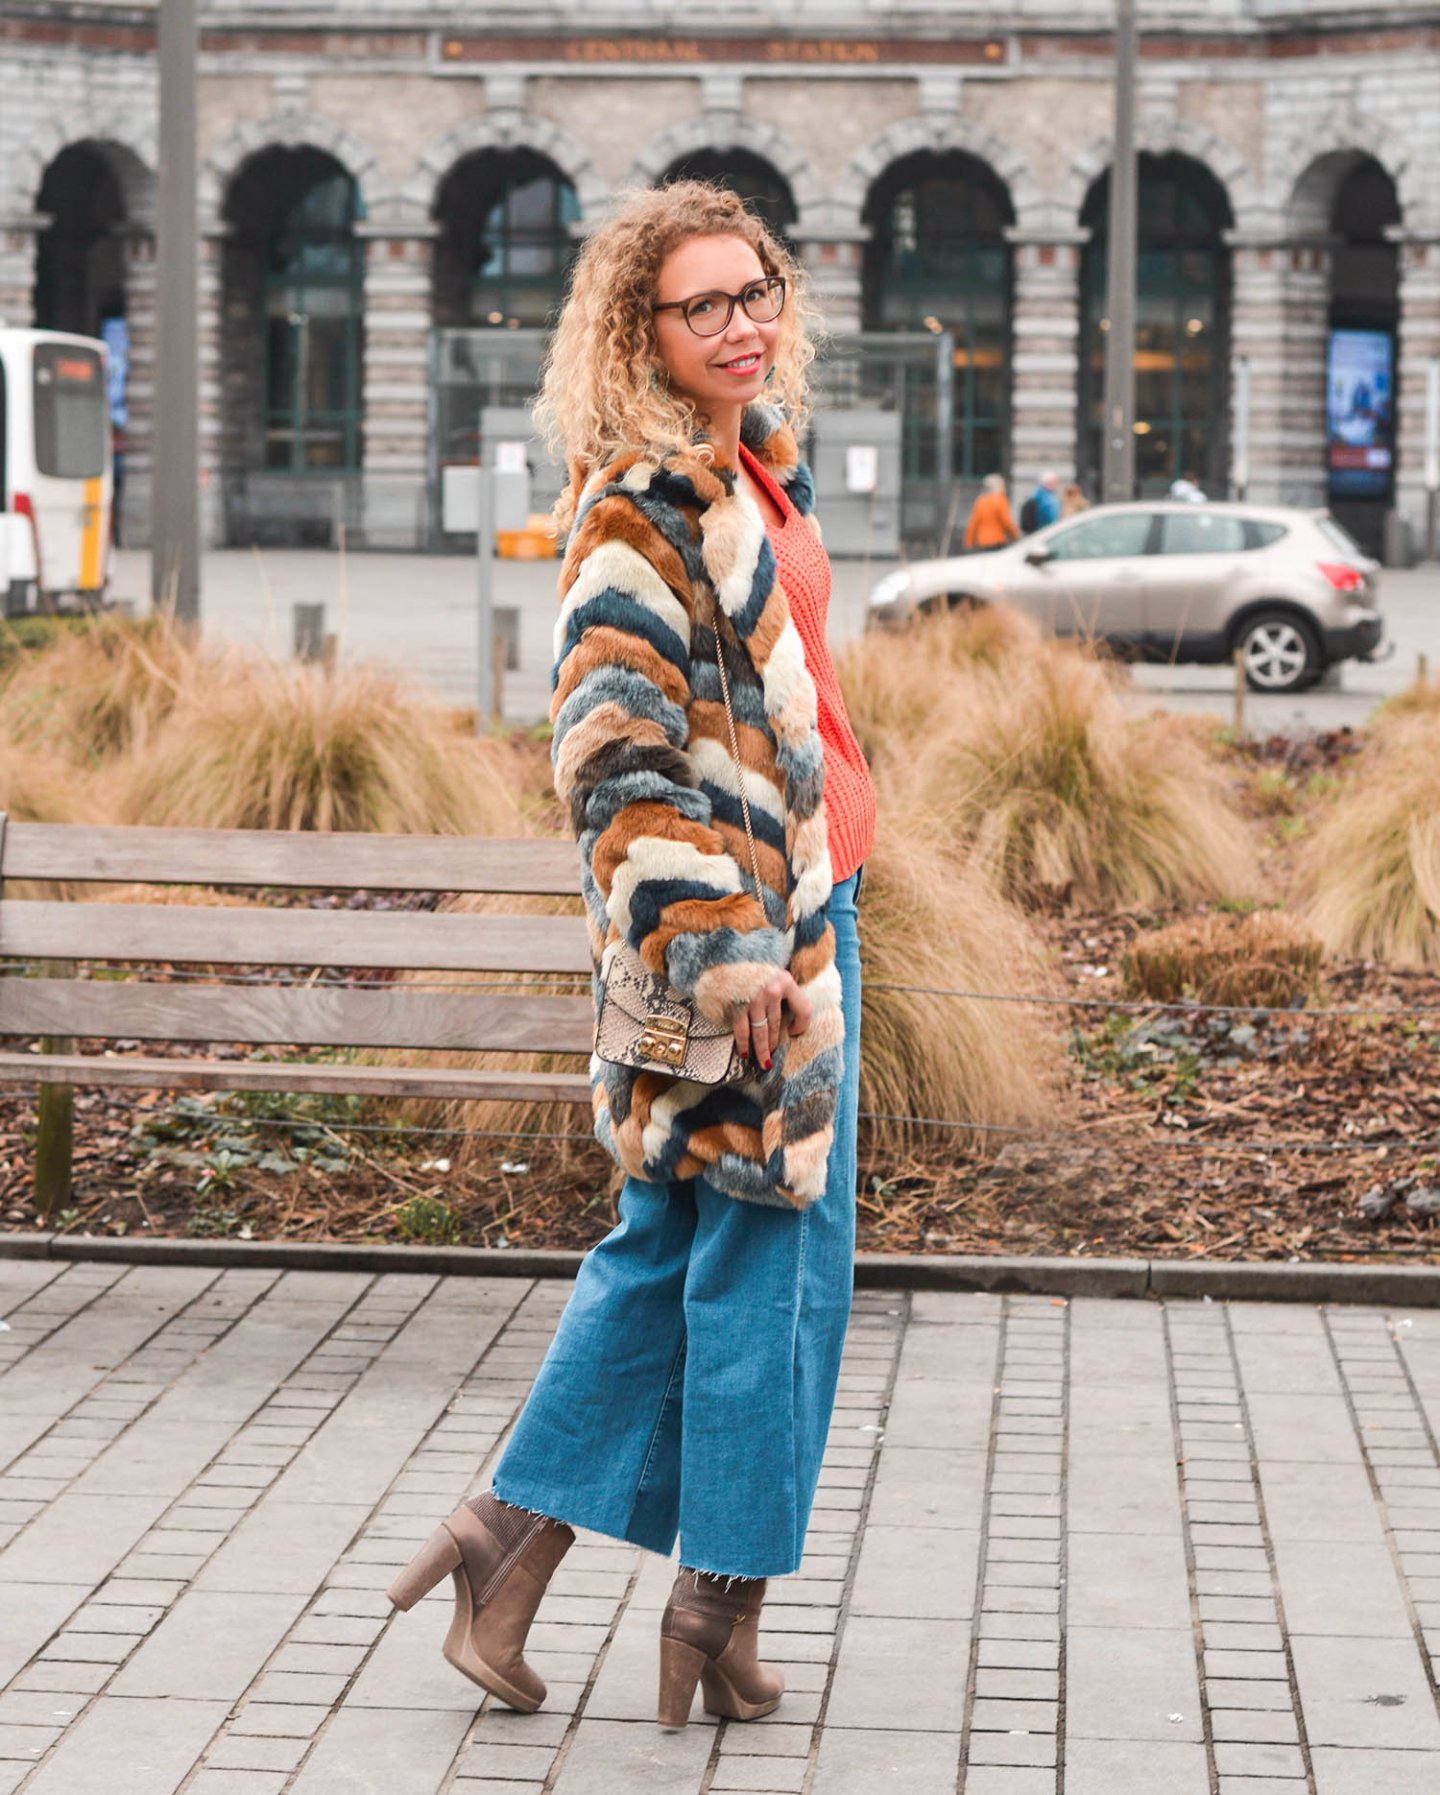 denim-culottes-kunstfellmantel-seventies-style-kationette-outfit